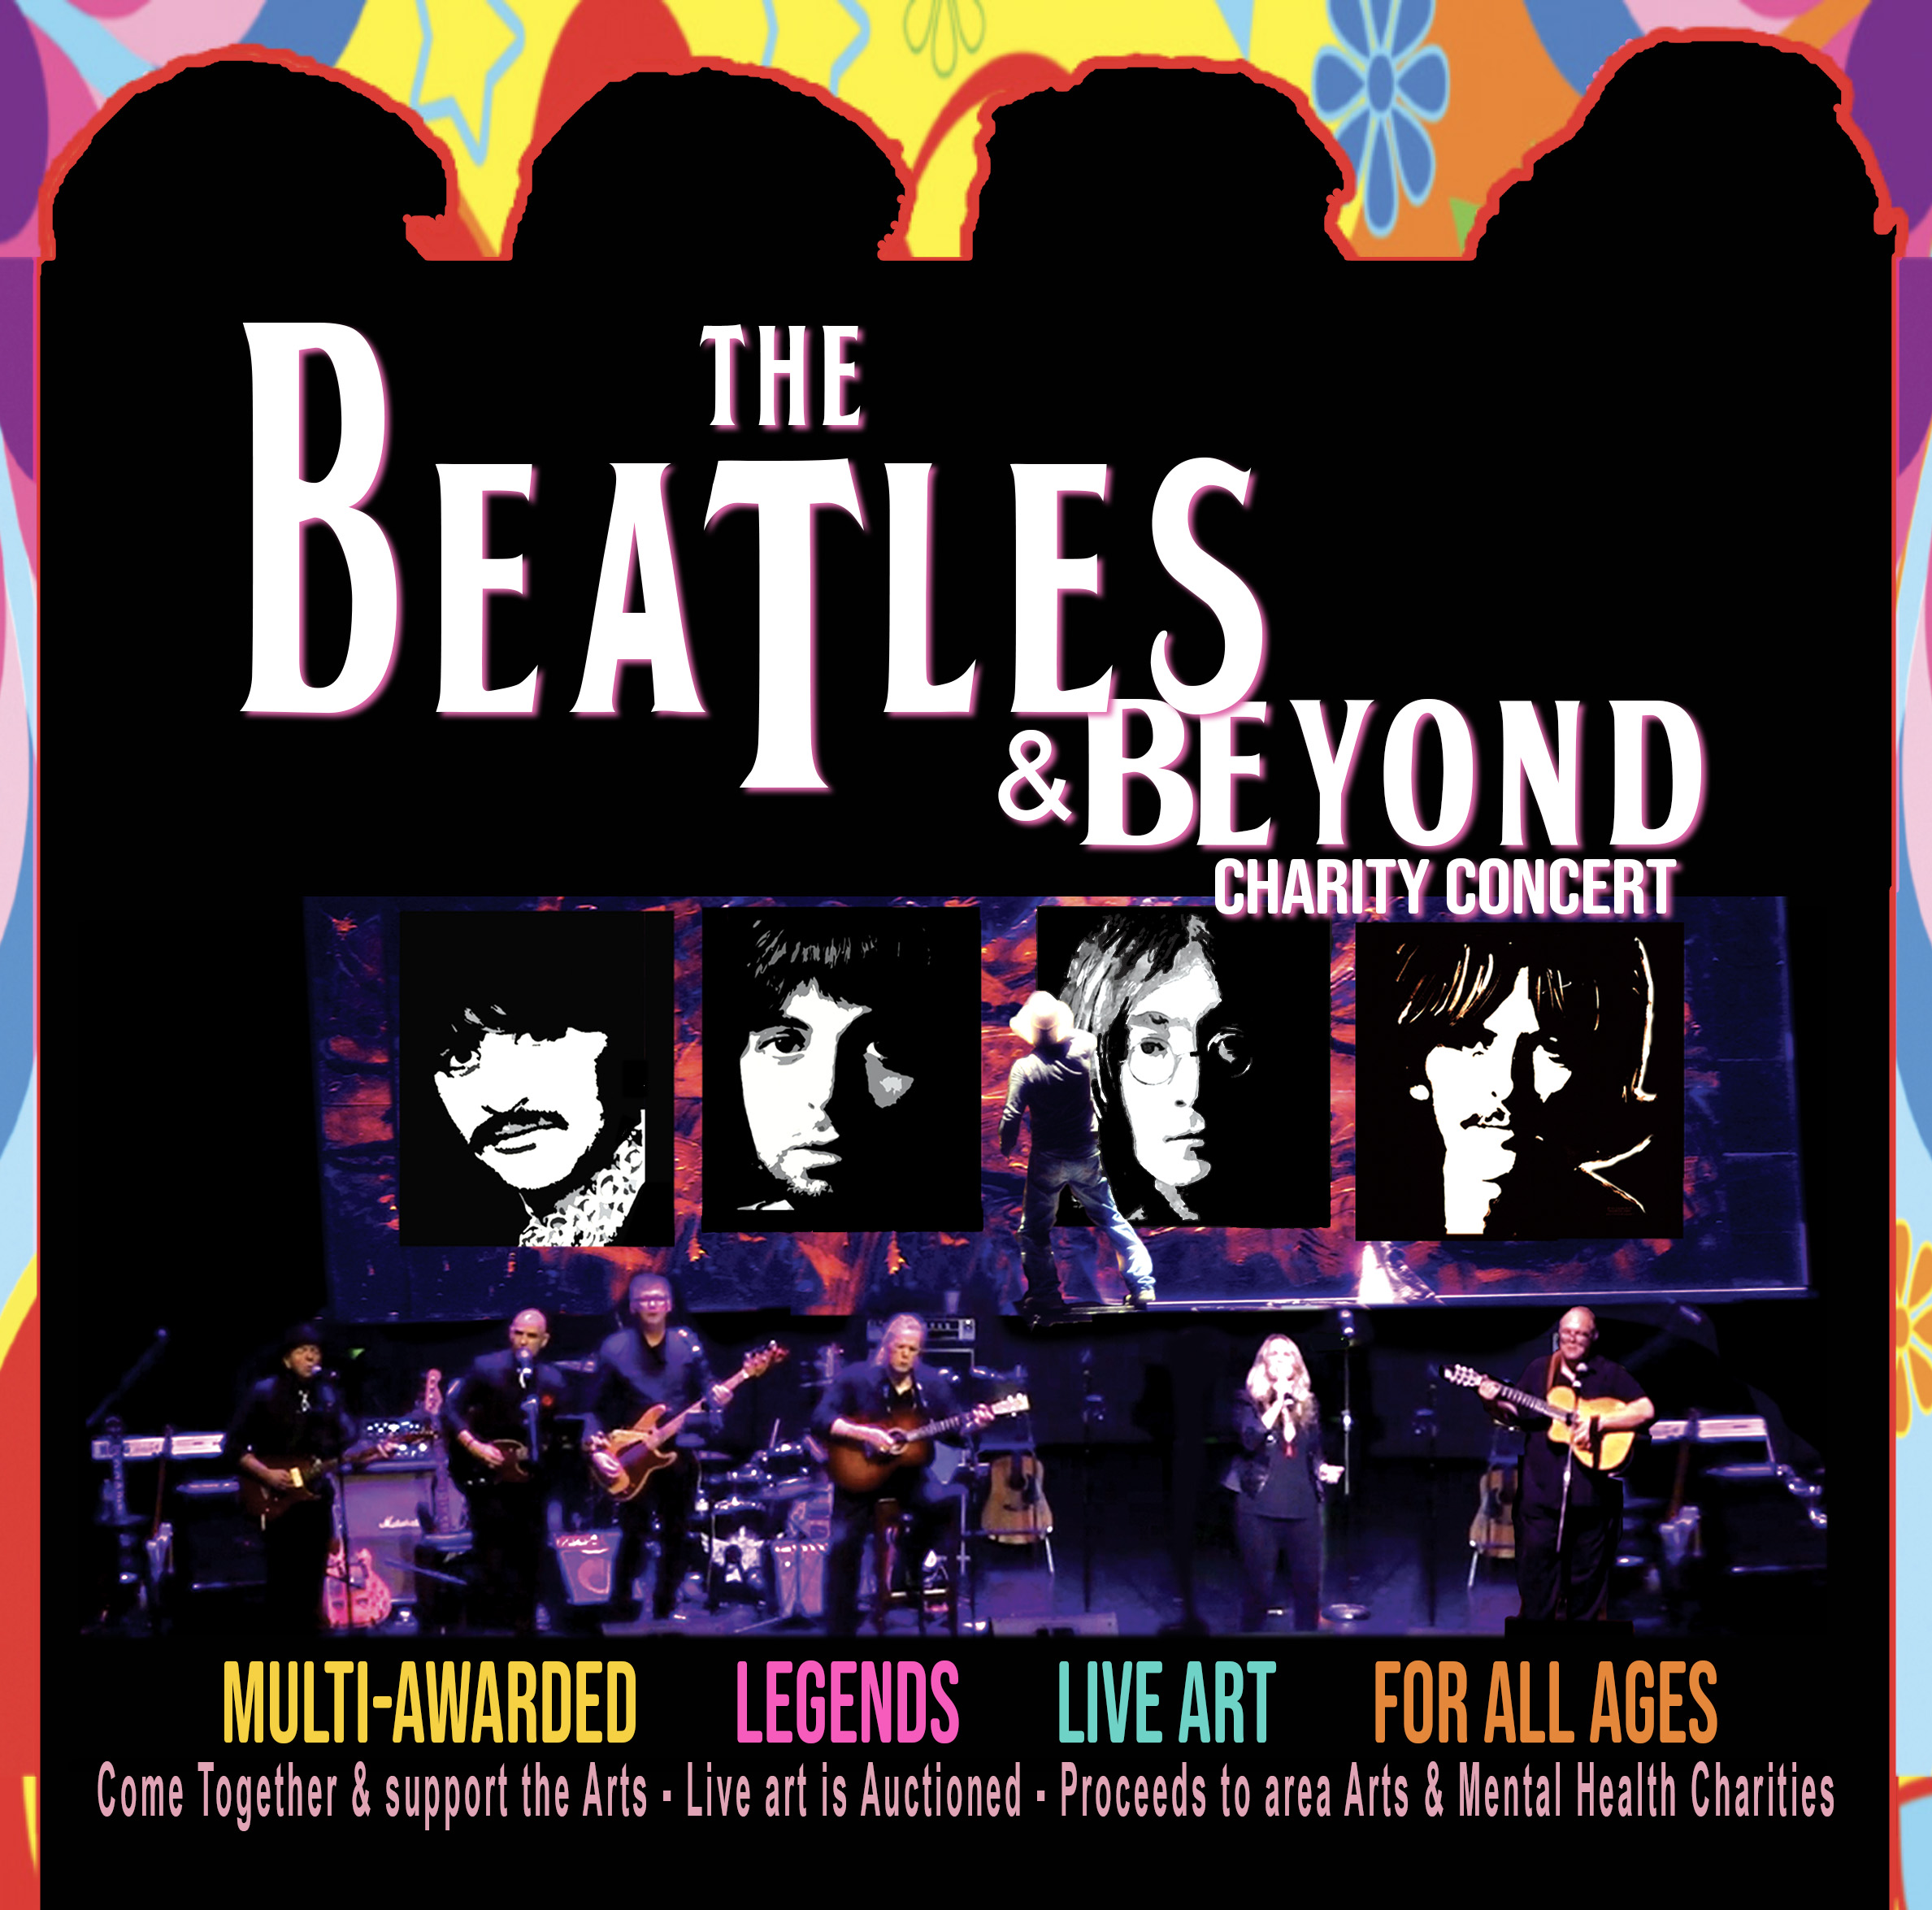 The Beatles & Beyond Charity Concert